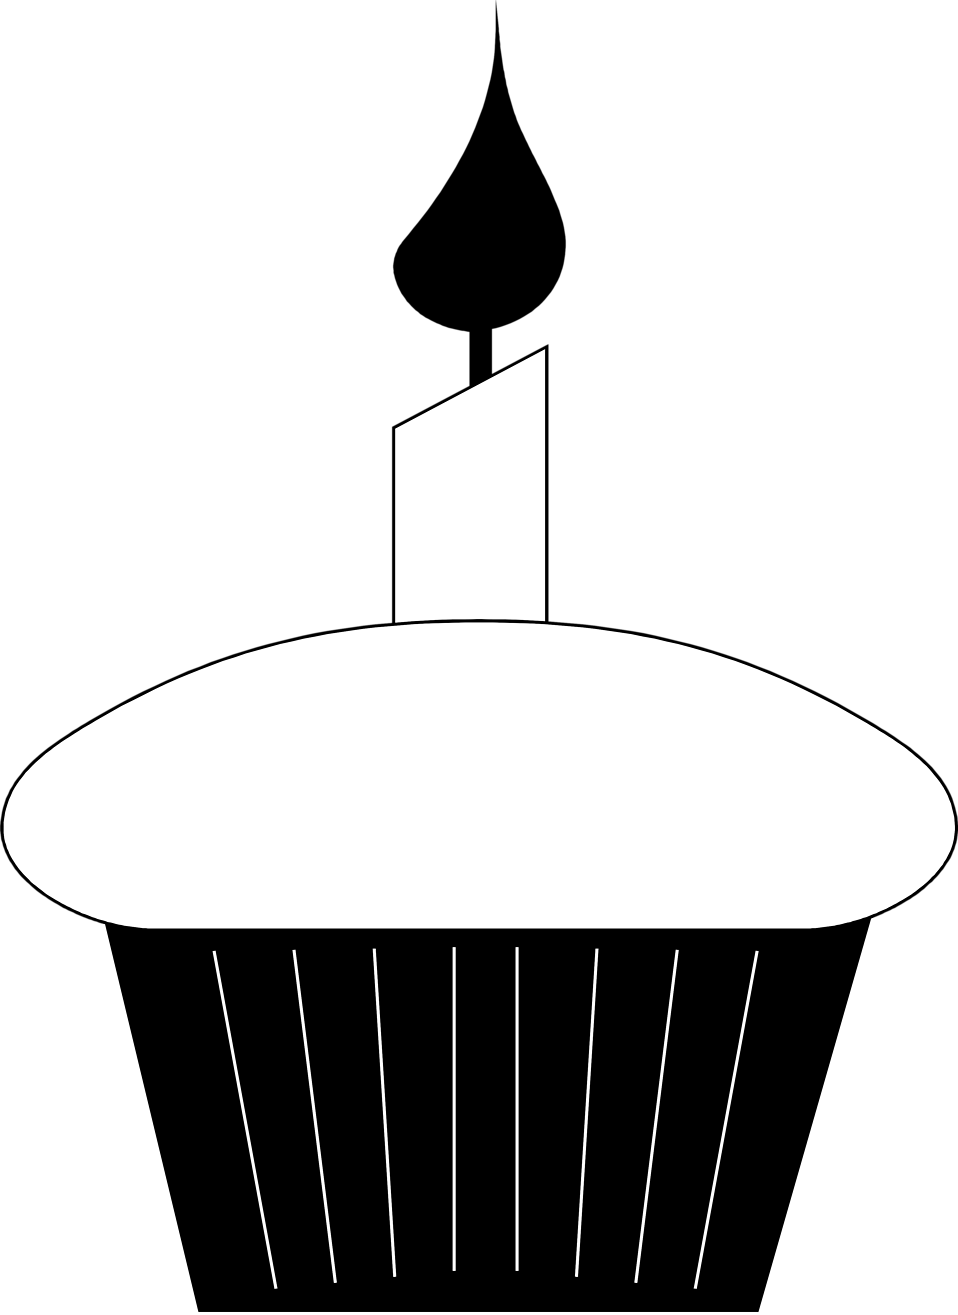 cupcakes clipart candle